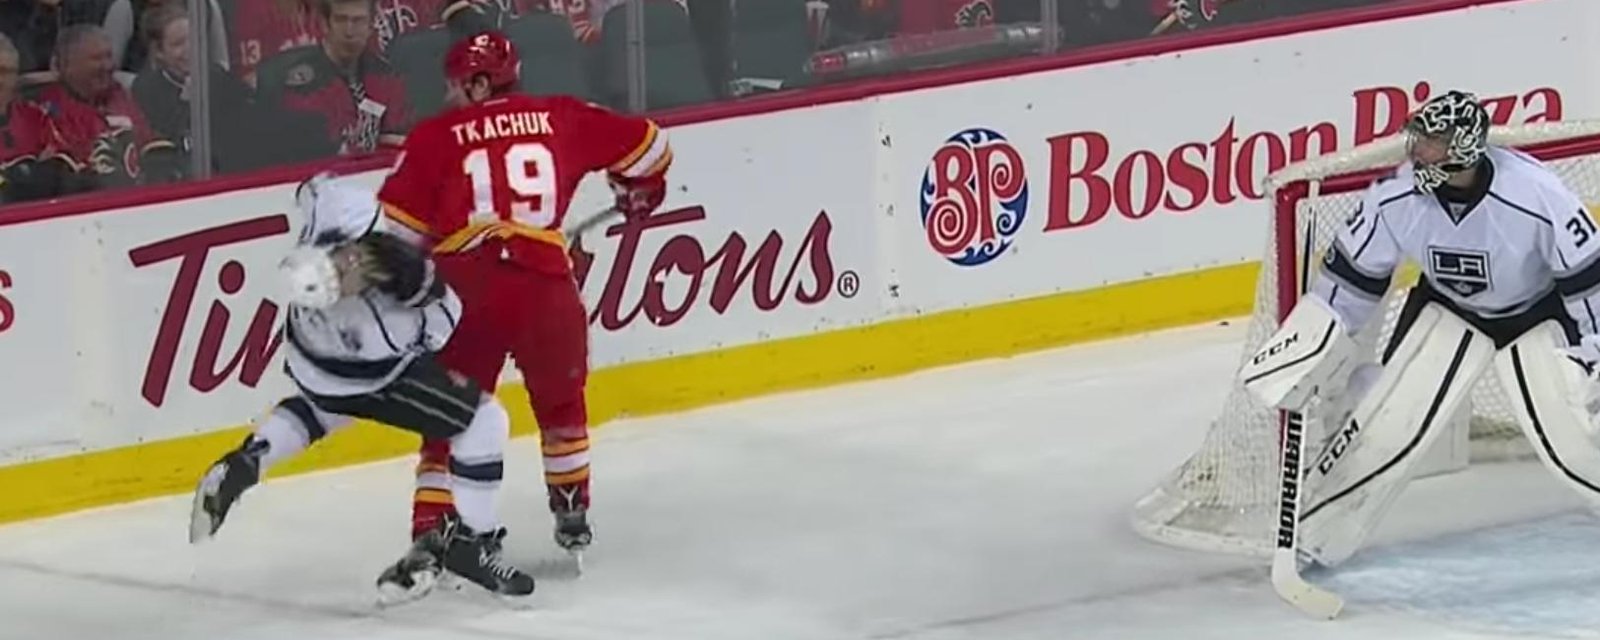 Shocking statement from former NHL STAR on Tkachuk suspension raises controversy.